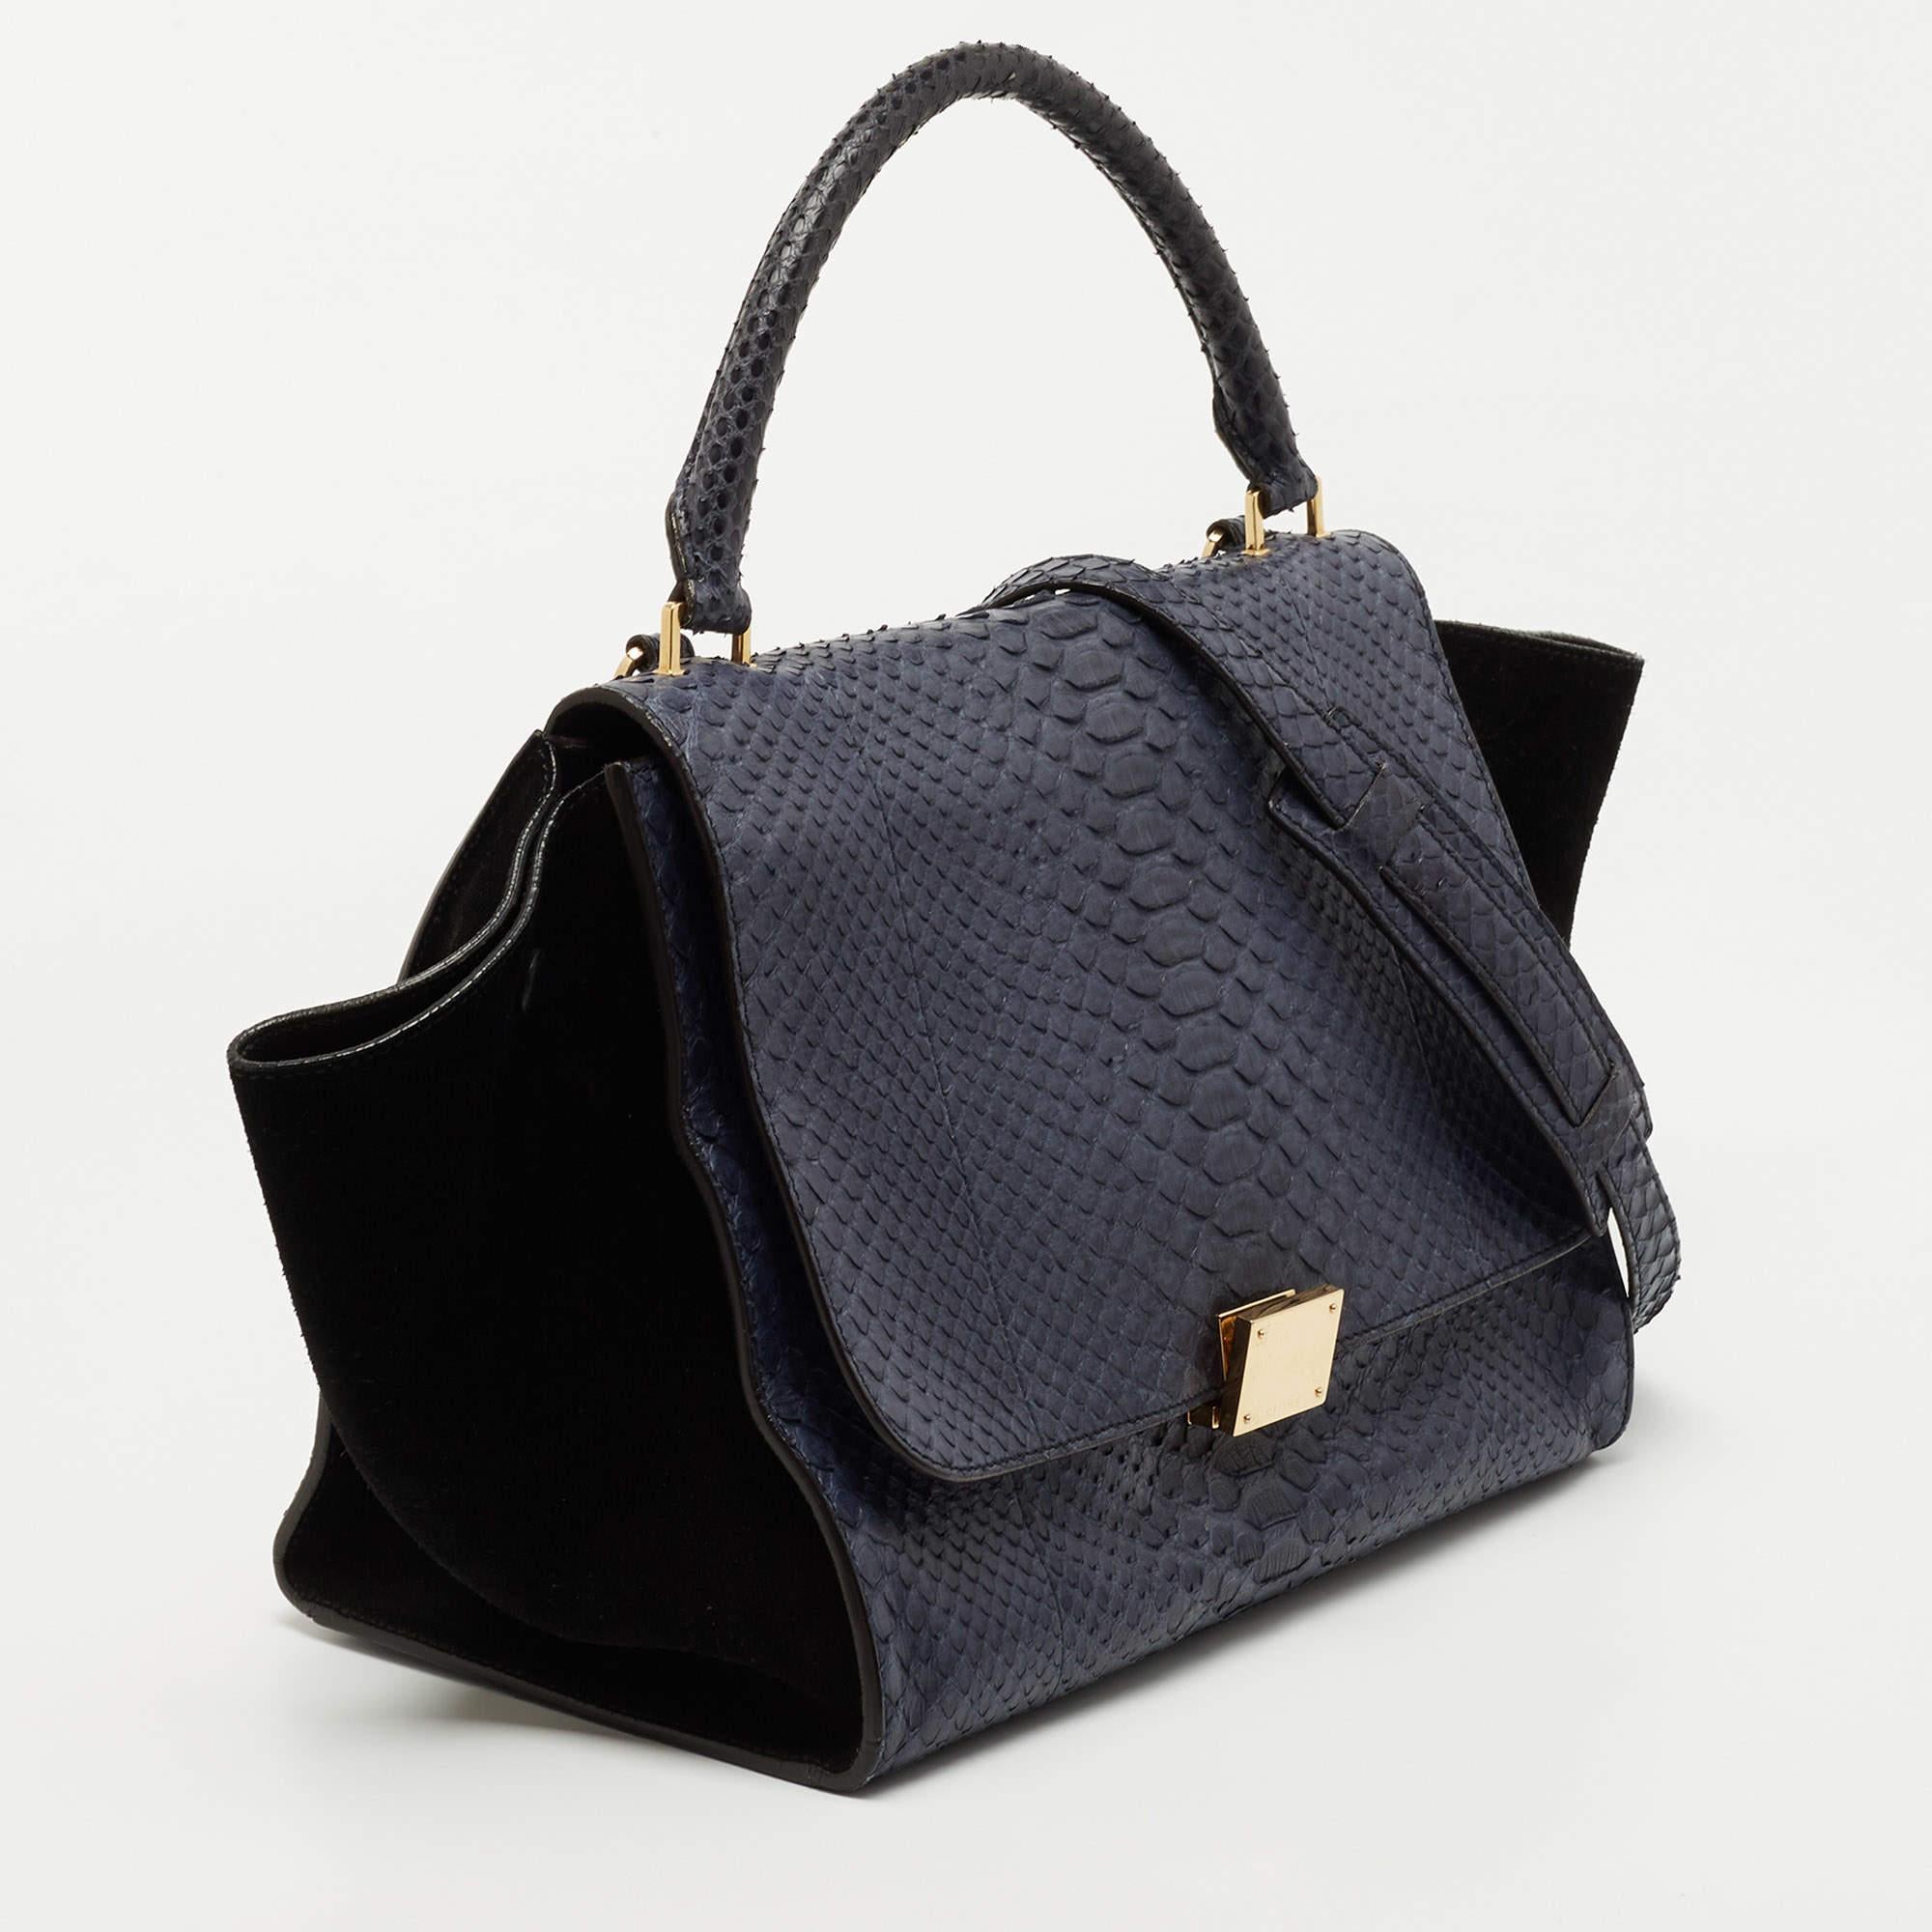 Thoughtful details, high quality, and everyday convenience mark this designer bag for women by Celine. The Trapeze tote is sewn with skill to deliver a refined look and an impeccable finish.

